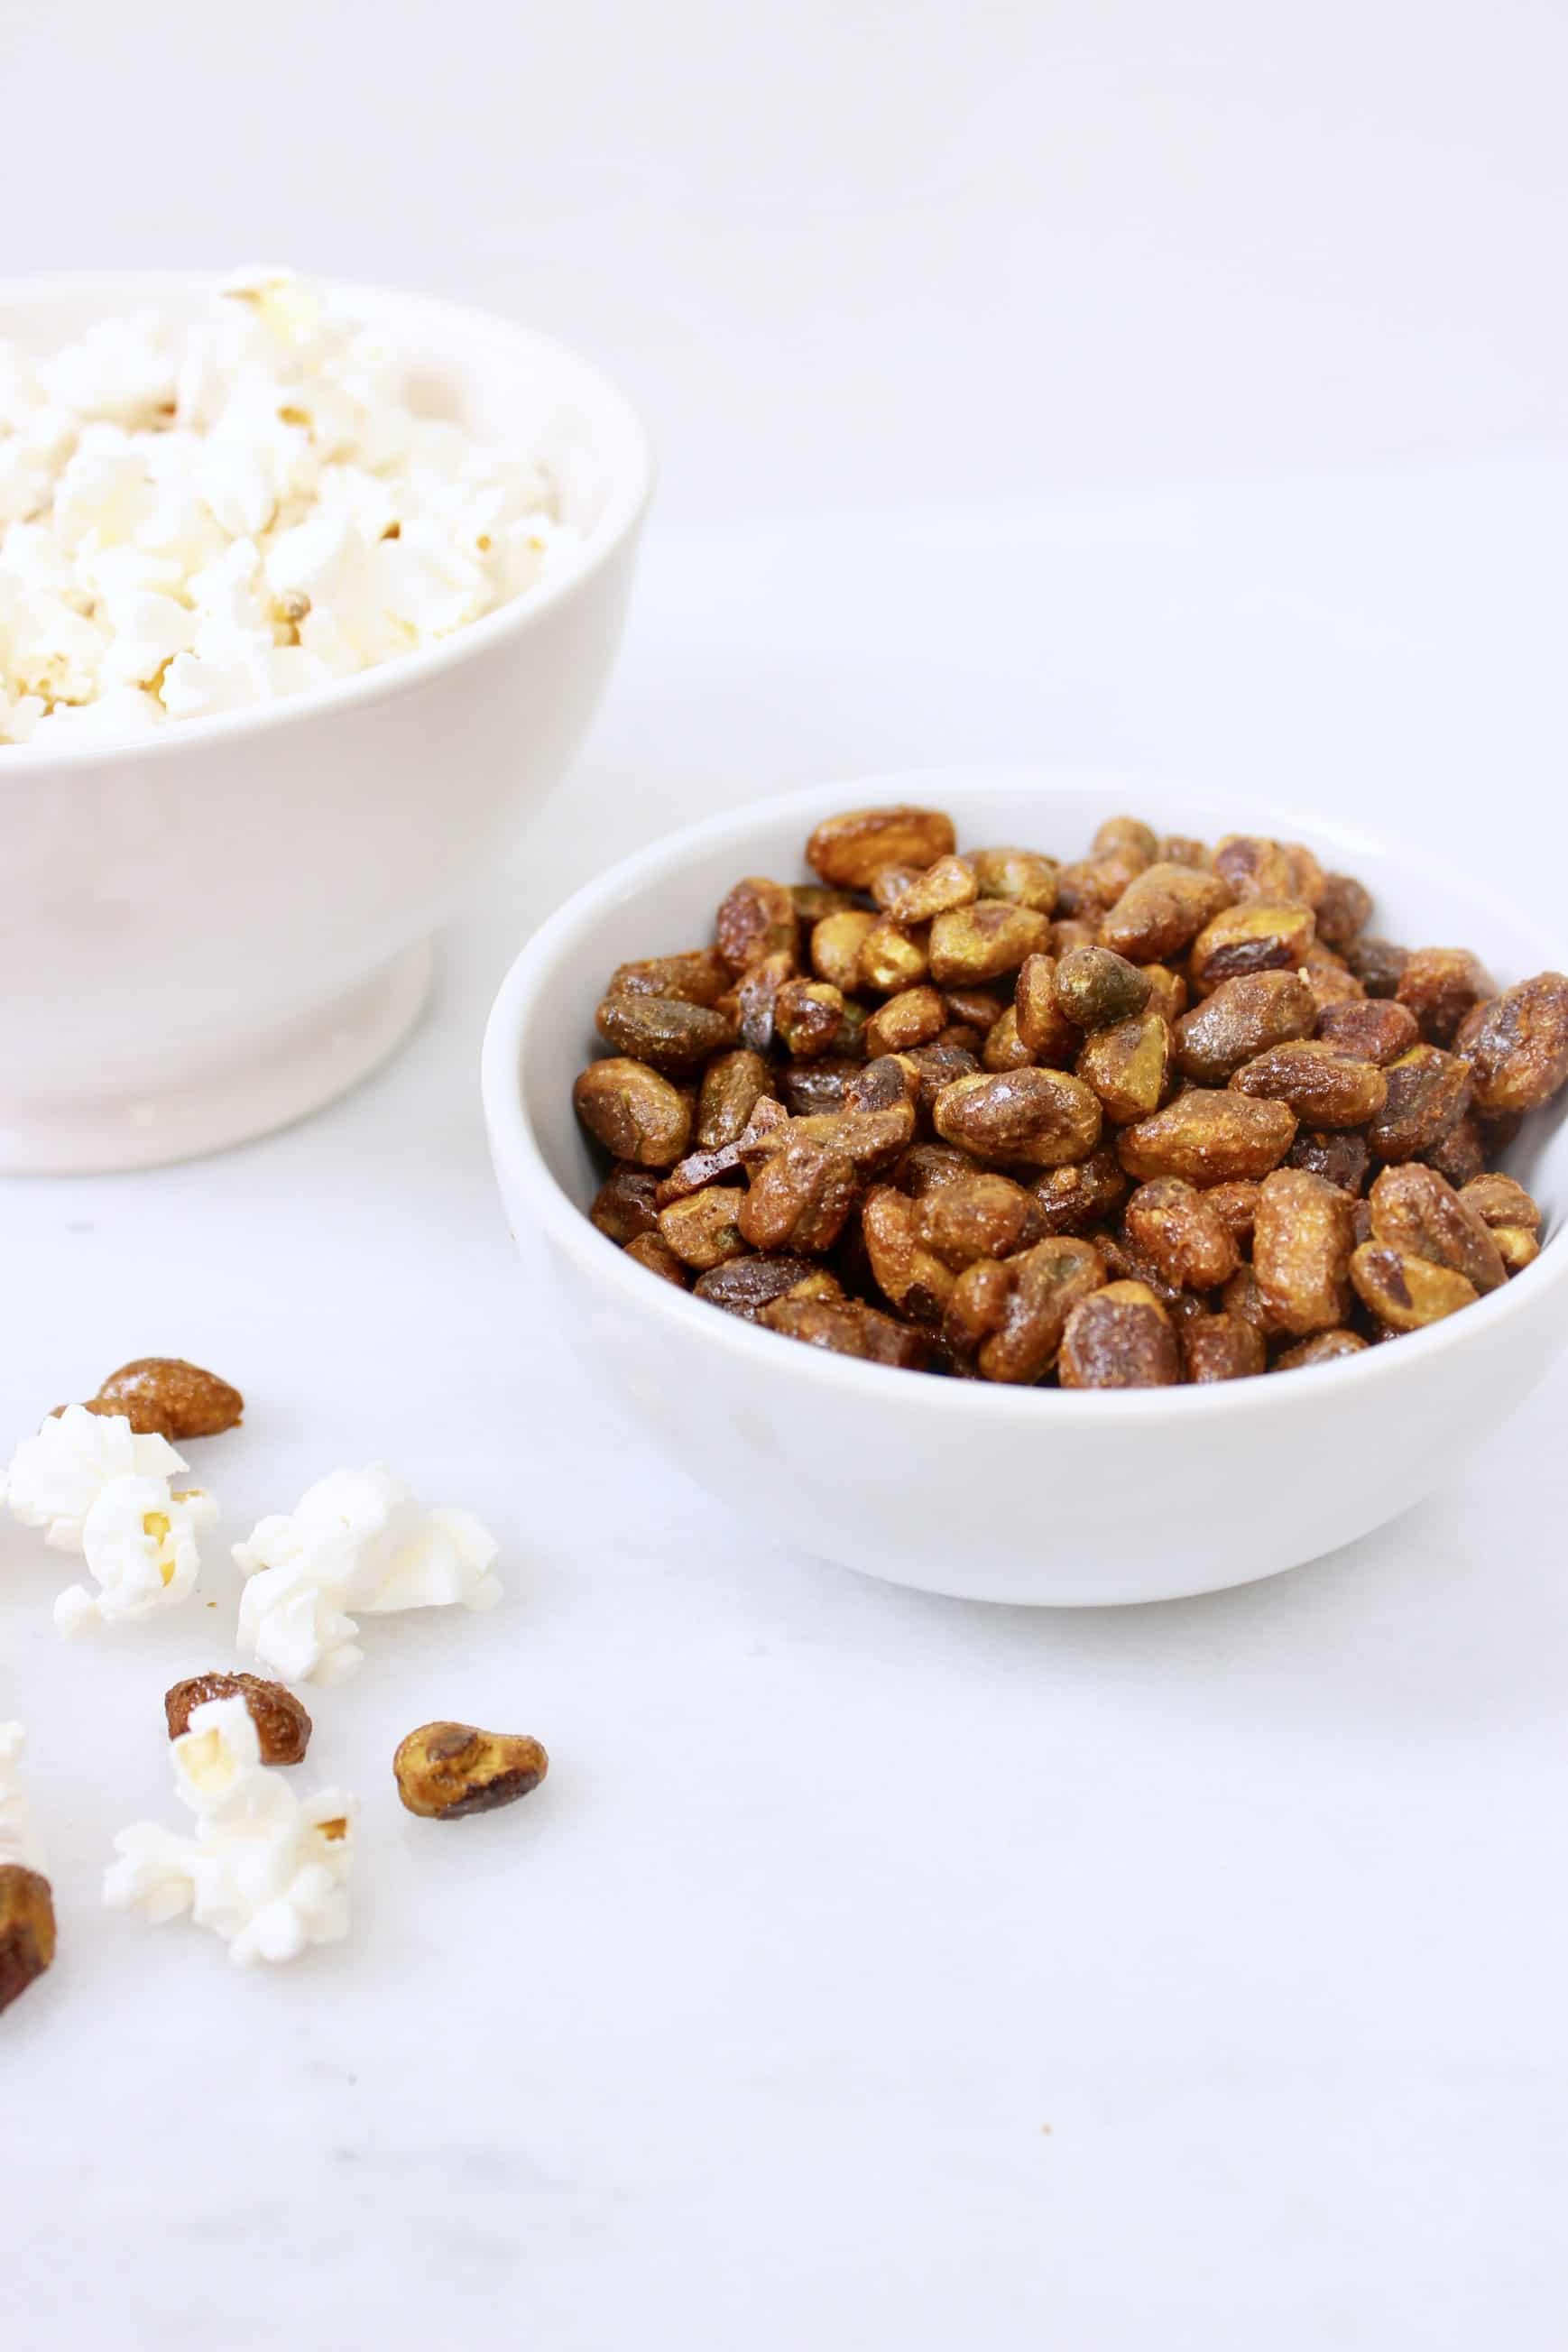 Candied nuts in white bowl against white background.